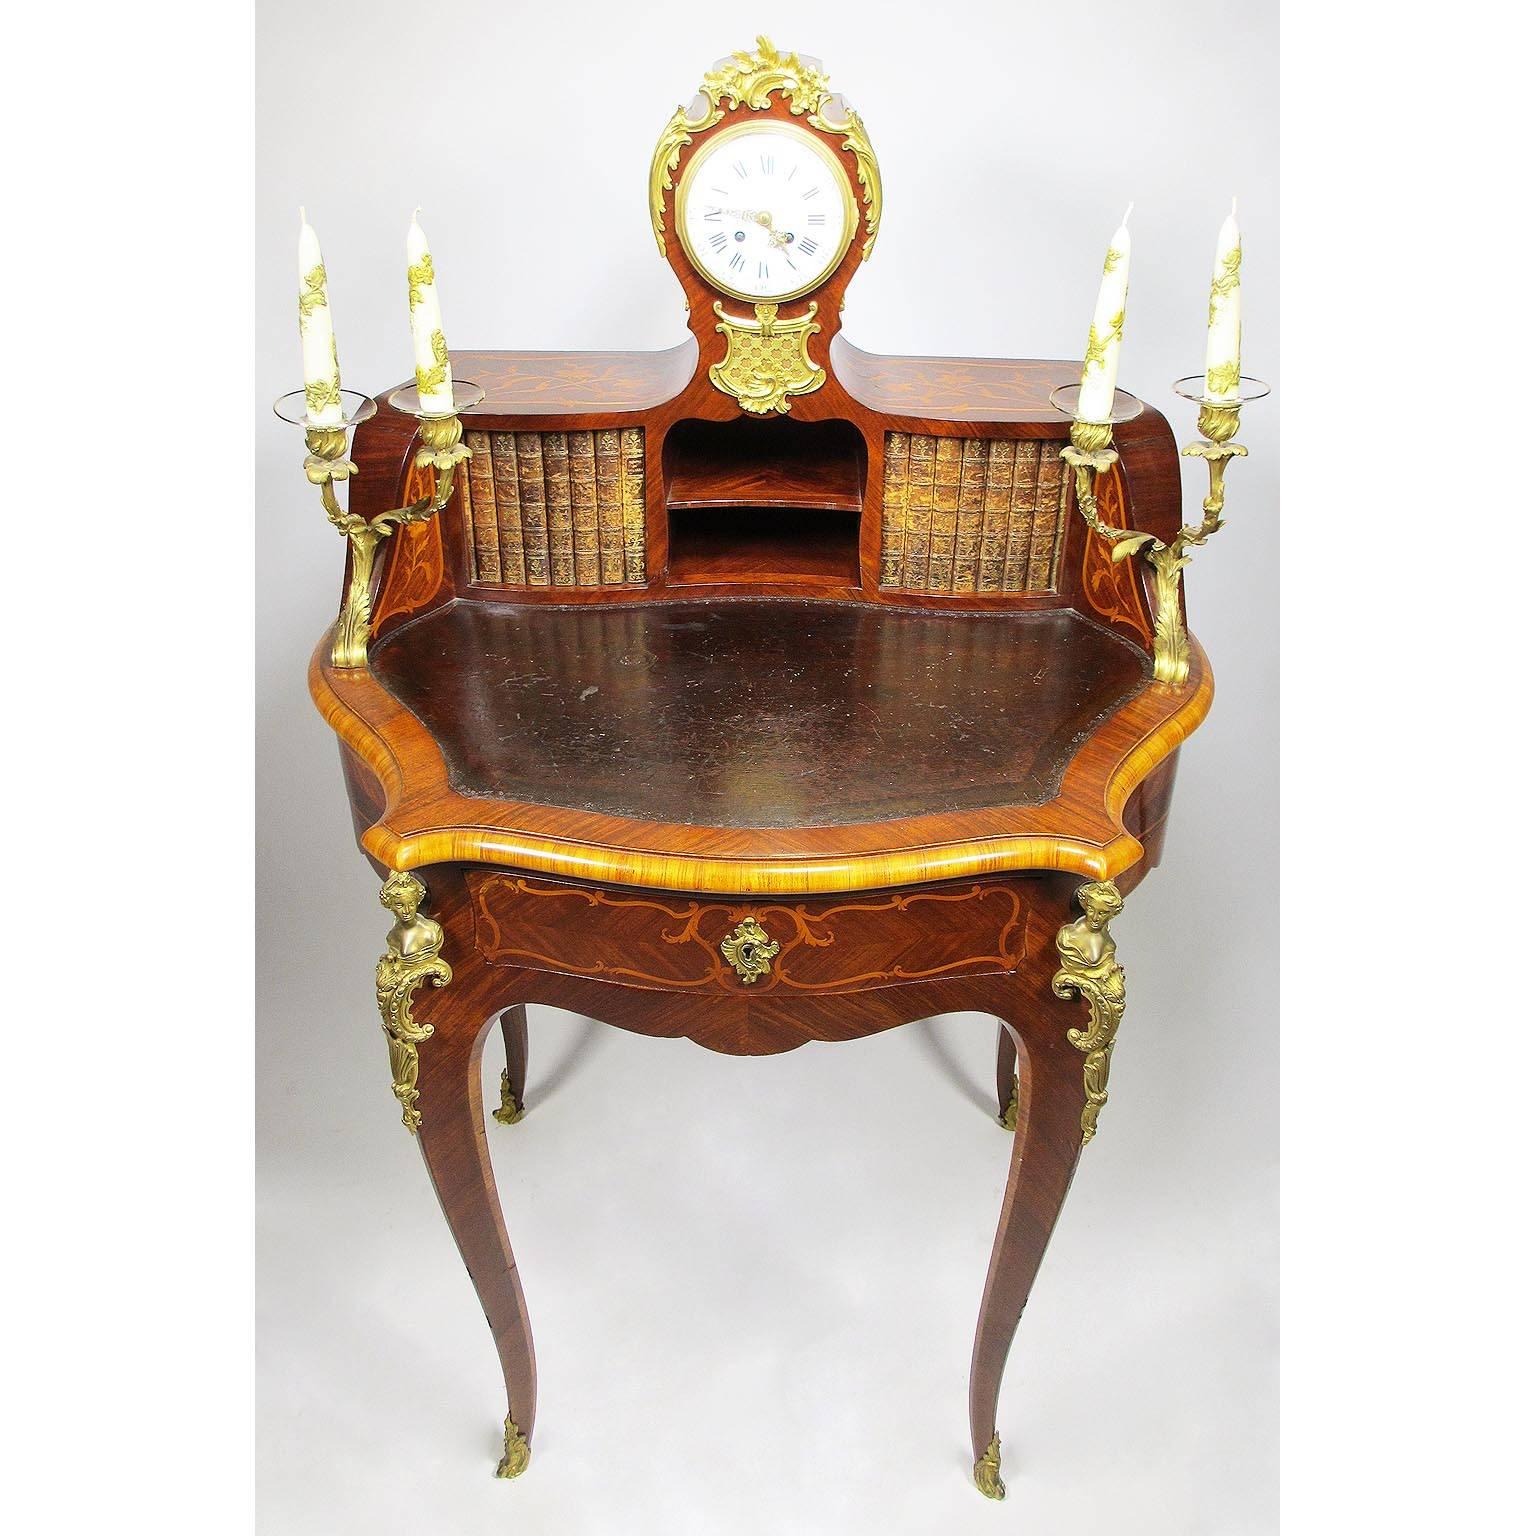 A very fine French 19th-20th century Louis XV style tulipwood and mahogany marquetry gilt bronze-mounted petit-bureau de dame (secretary). The bombe´ structure surmounted by a pair of gilt-bronze twin candelabra centered with a clock, the porcelain